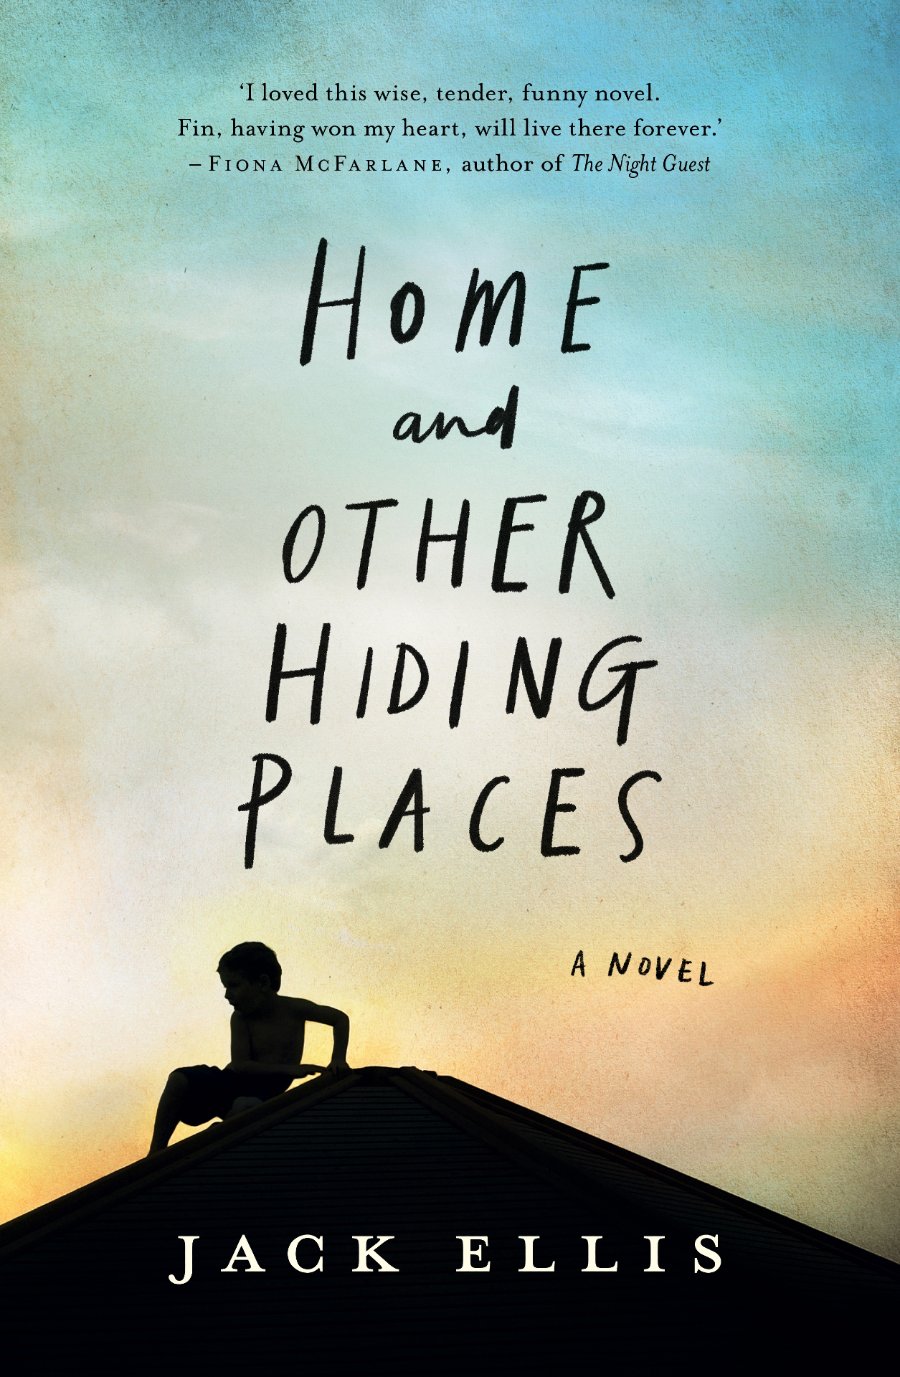 home and other hiding places